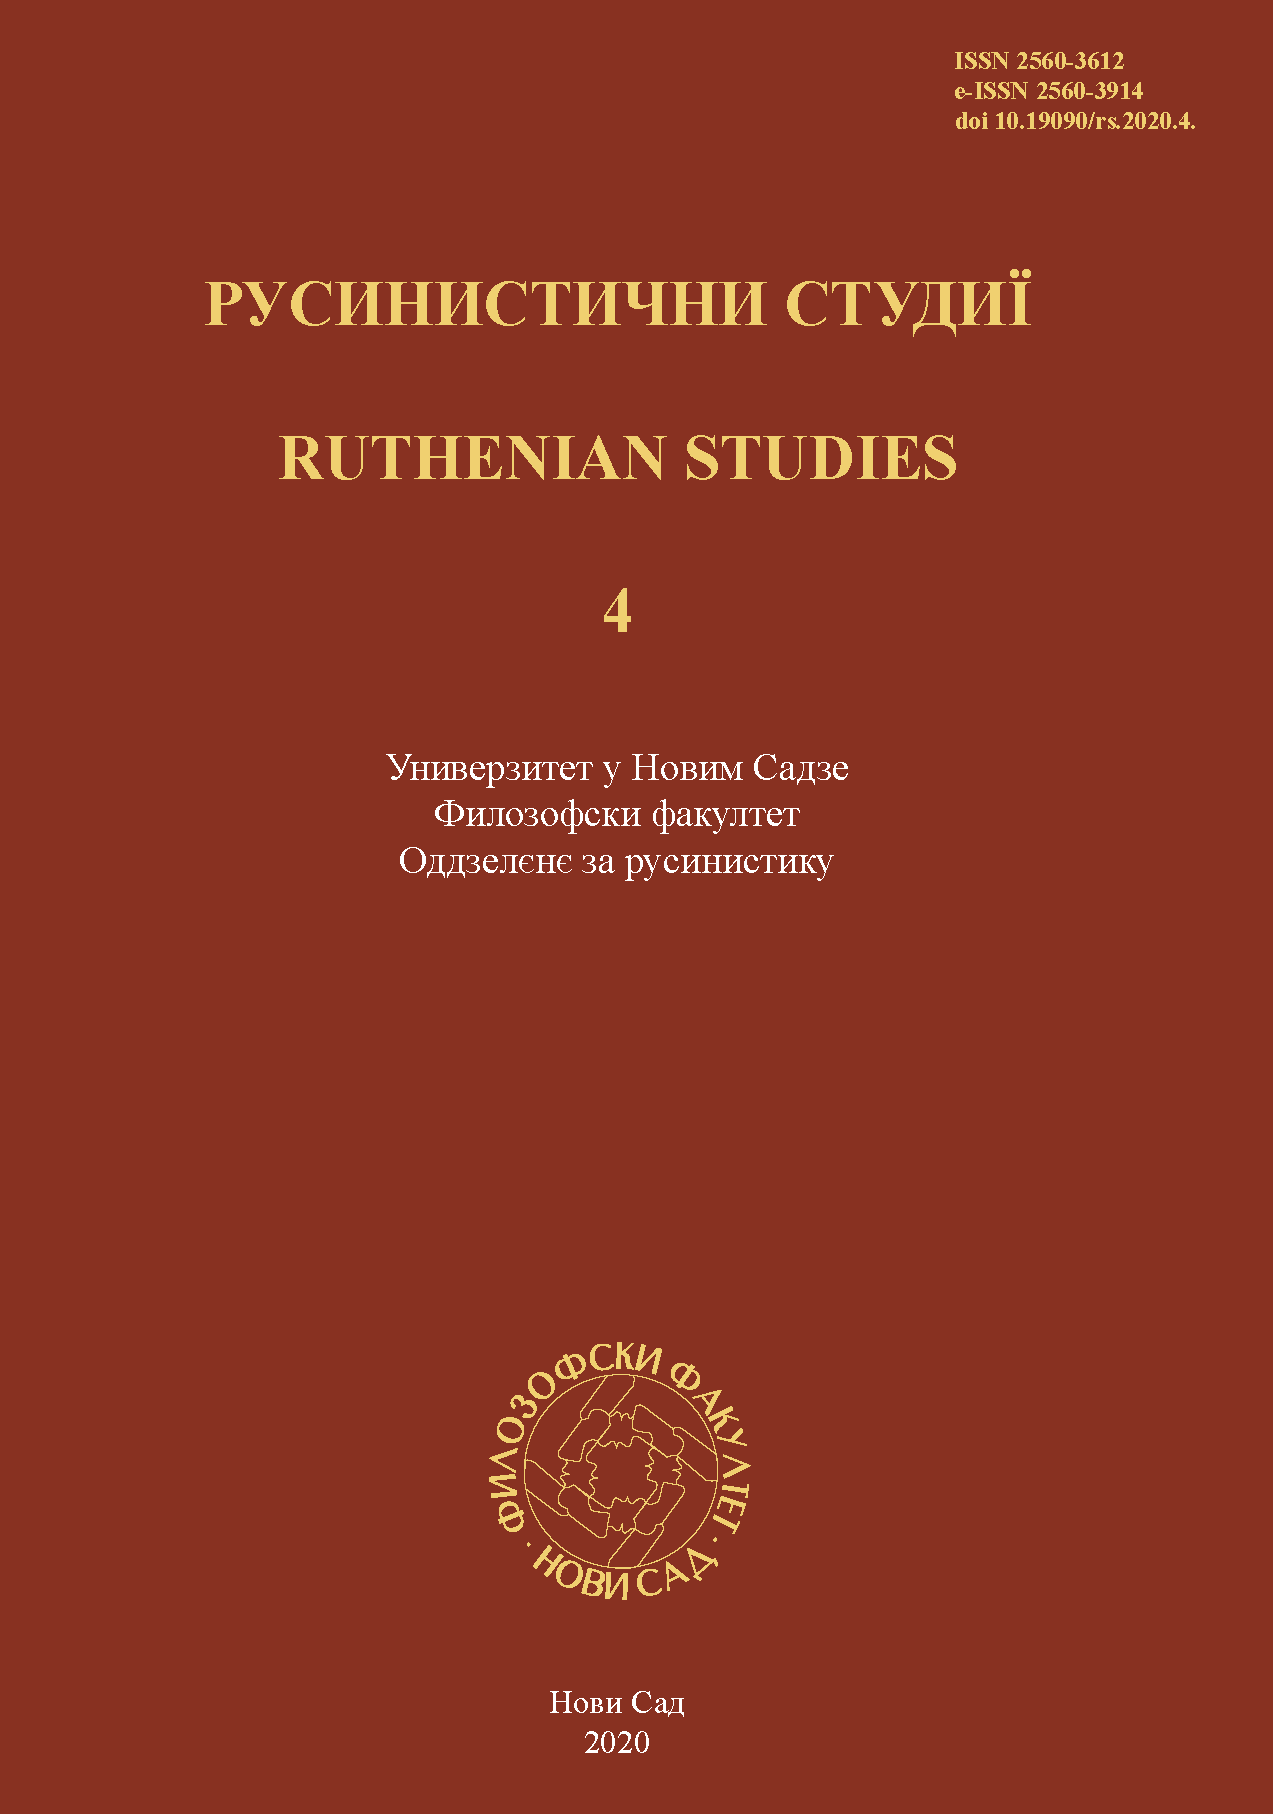 M. BUDYNSKY'S LETTER TO O. MYSHANYCH (1970) IN THE CONTEXT OF THE QUESTION OF THE IDENTITY OF THE RUTHENIANS BACHKA AND SREM Cover Image